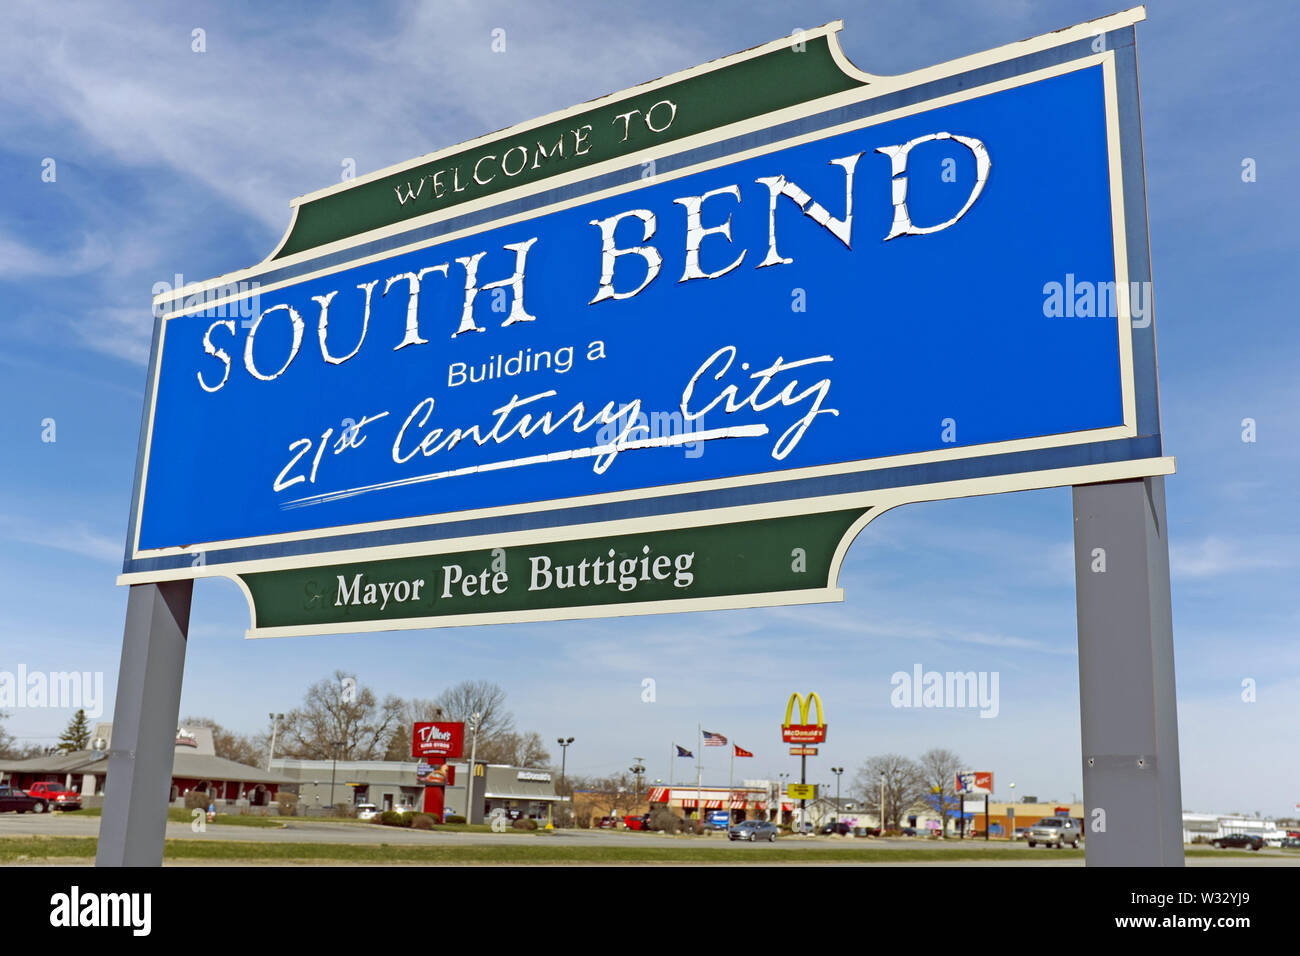 The 'Welcome to South Bend Building a 21st Century City' sign with the name of the mayor, Mayor Pete Buttigieg, underneath. Stock Photo